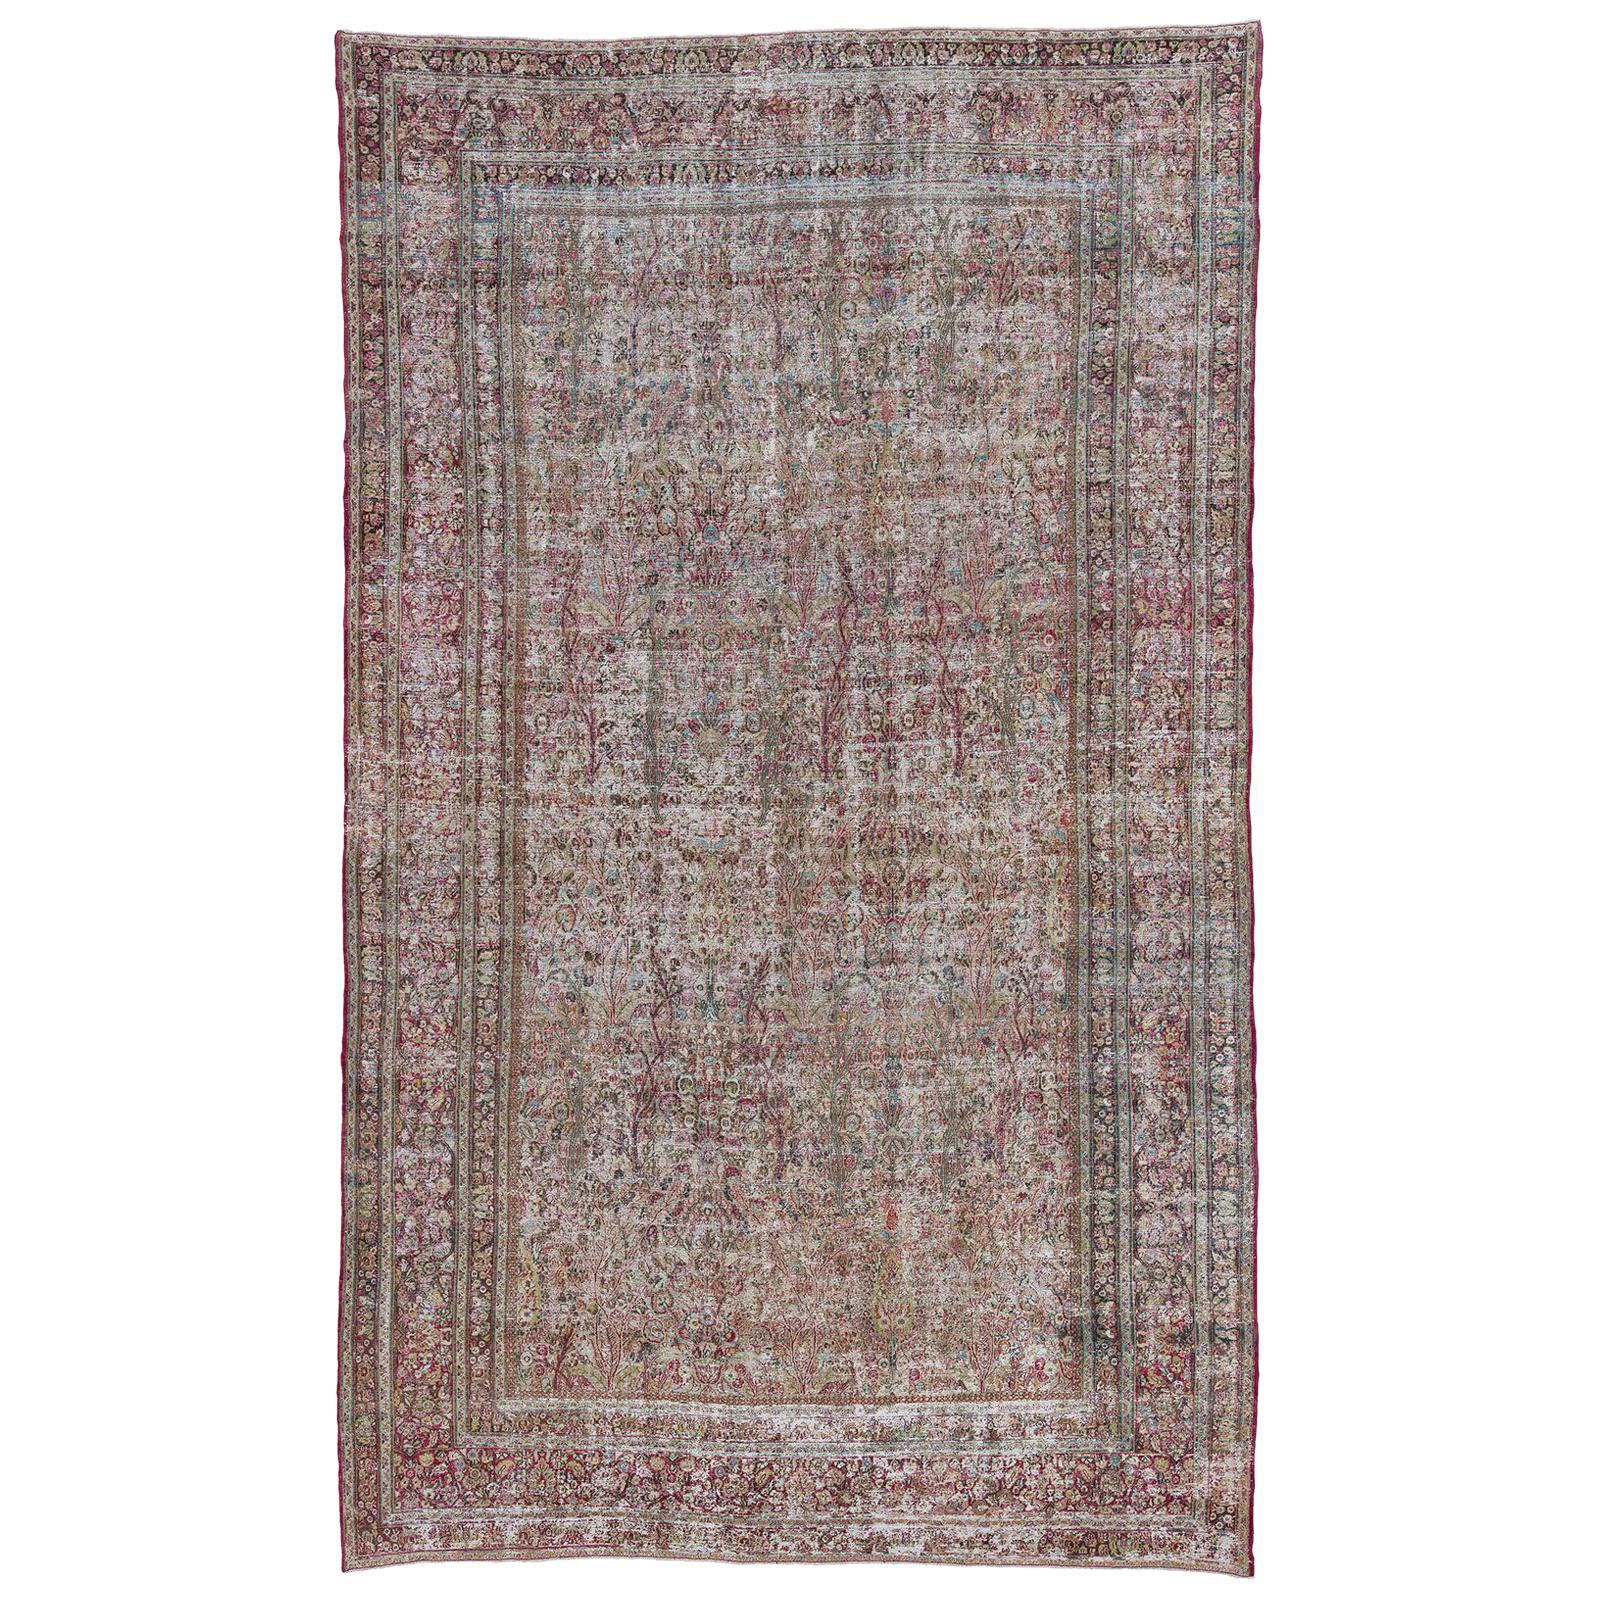 Shabby Chic Distressed Persian Oversize Carpet